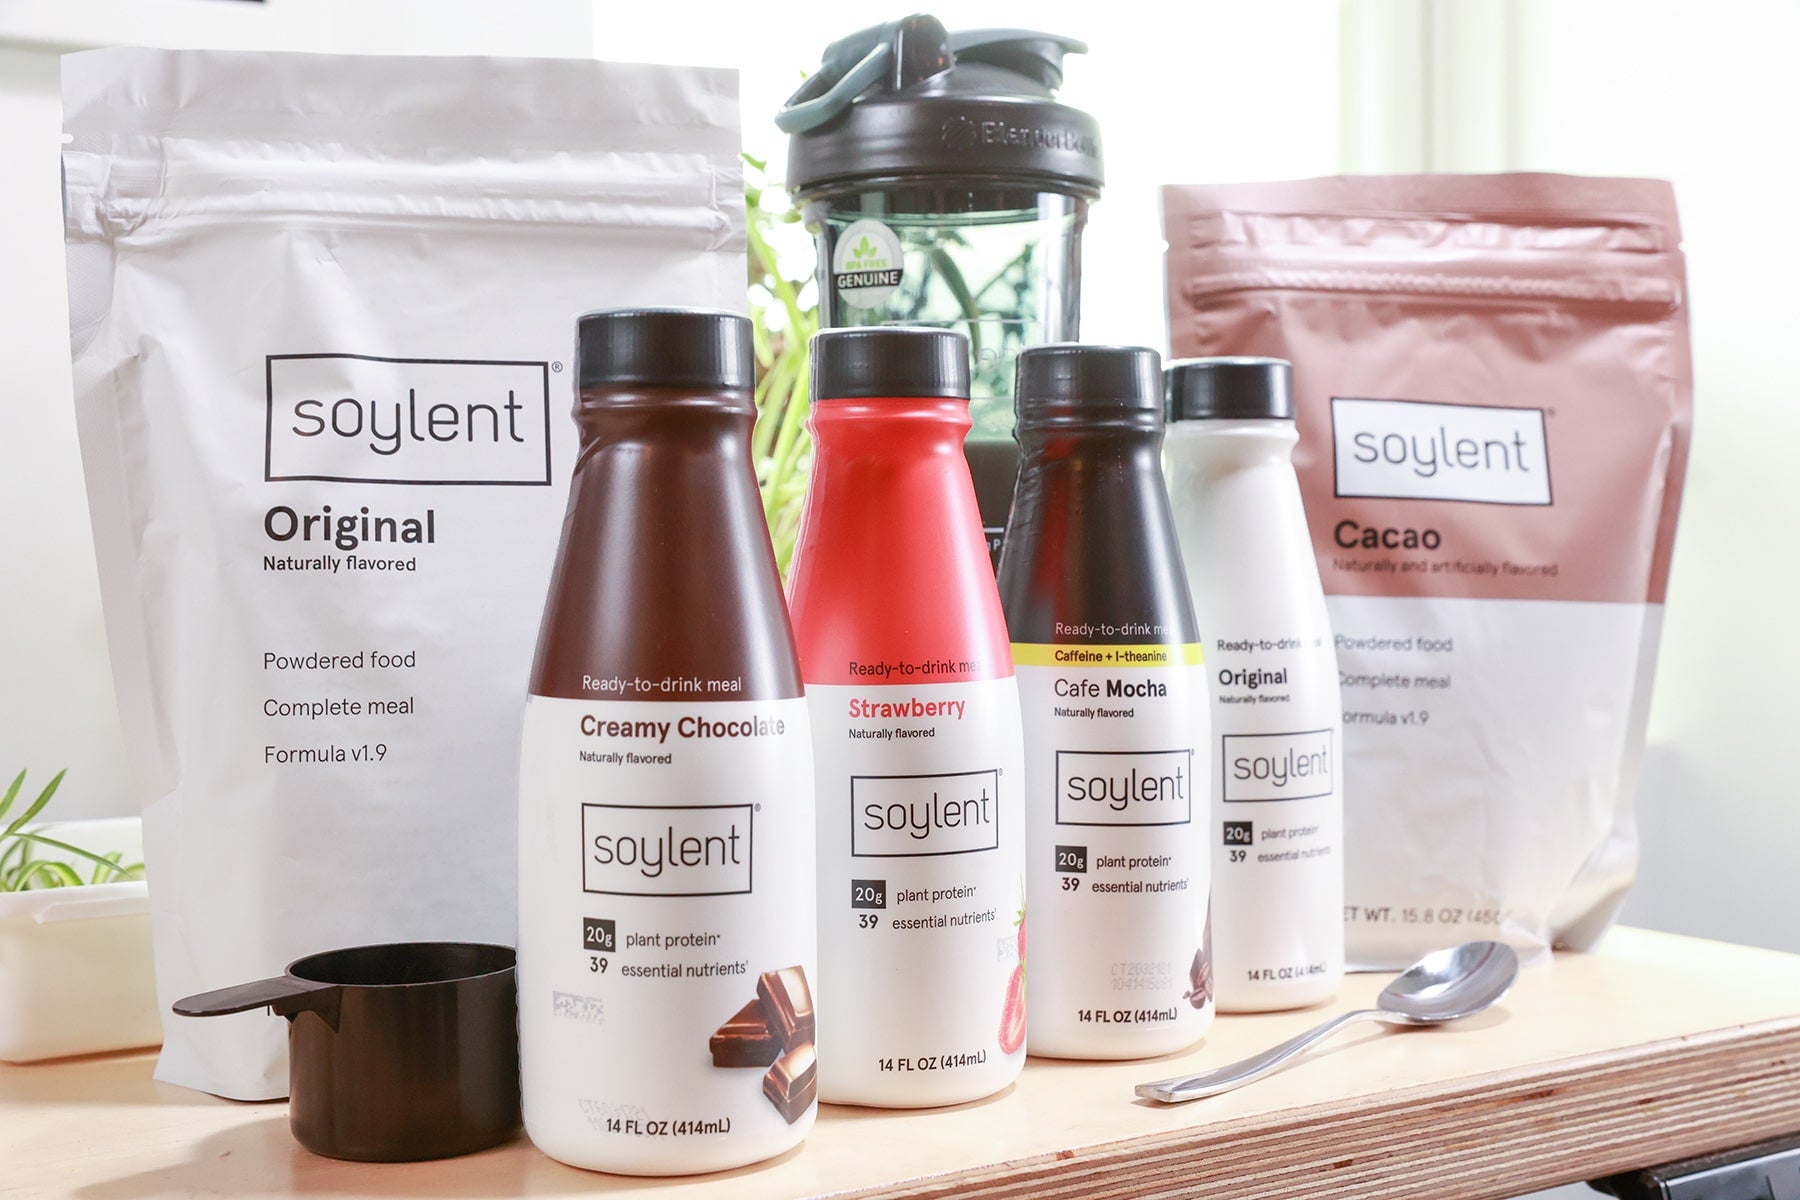 Product display of Soylent products